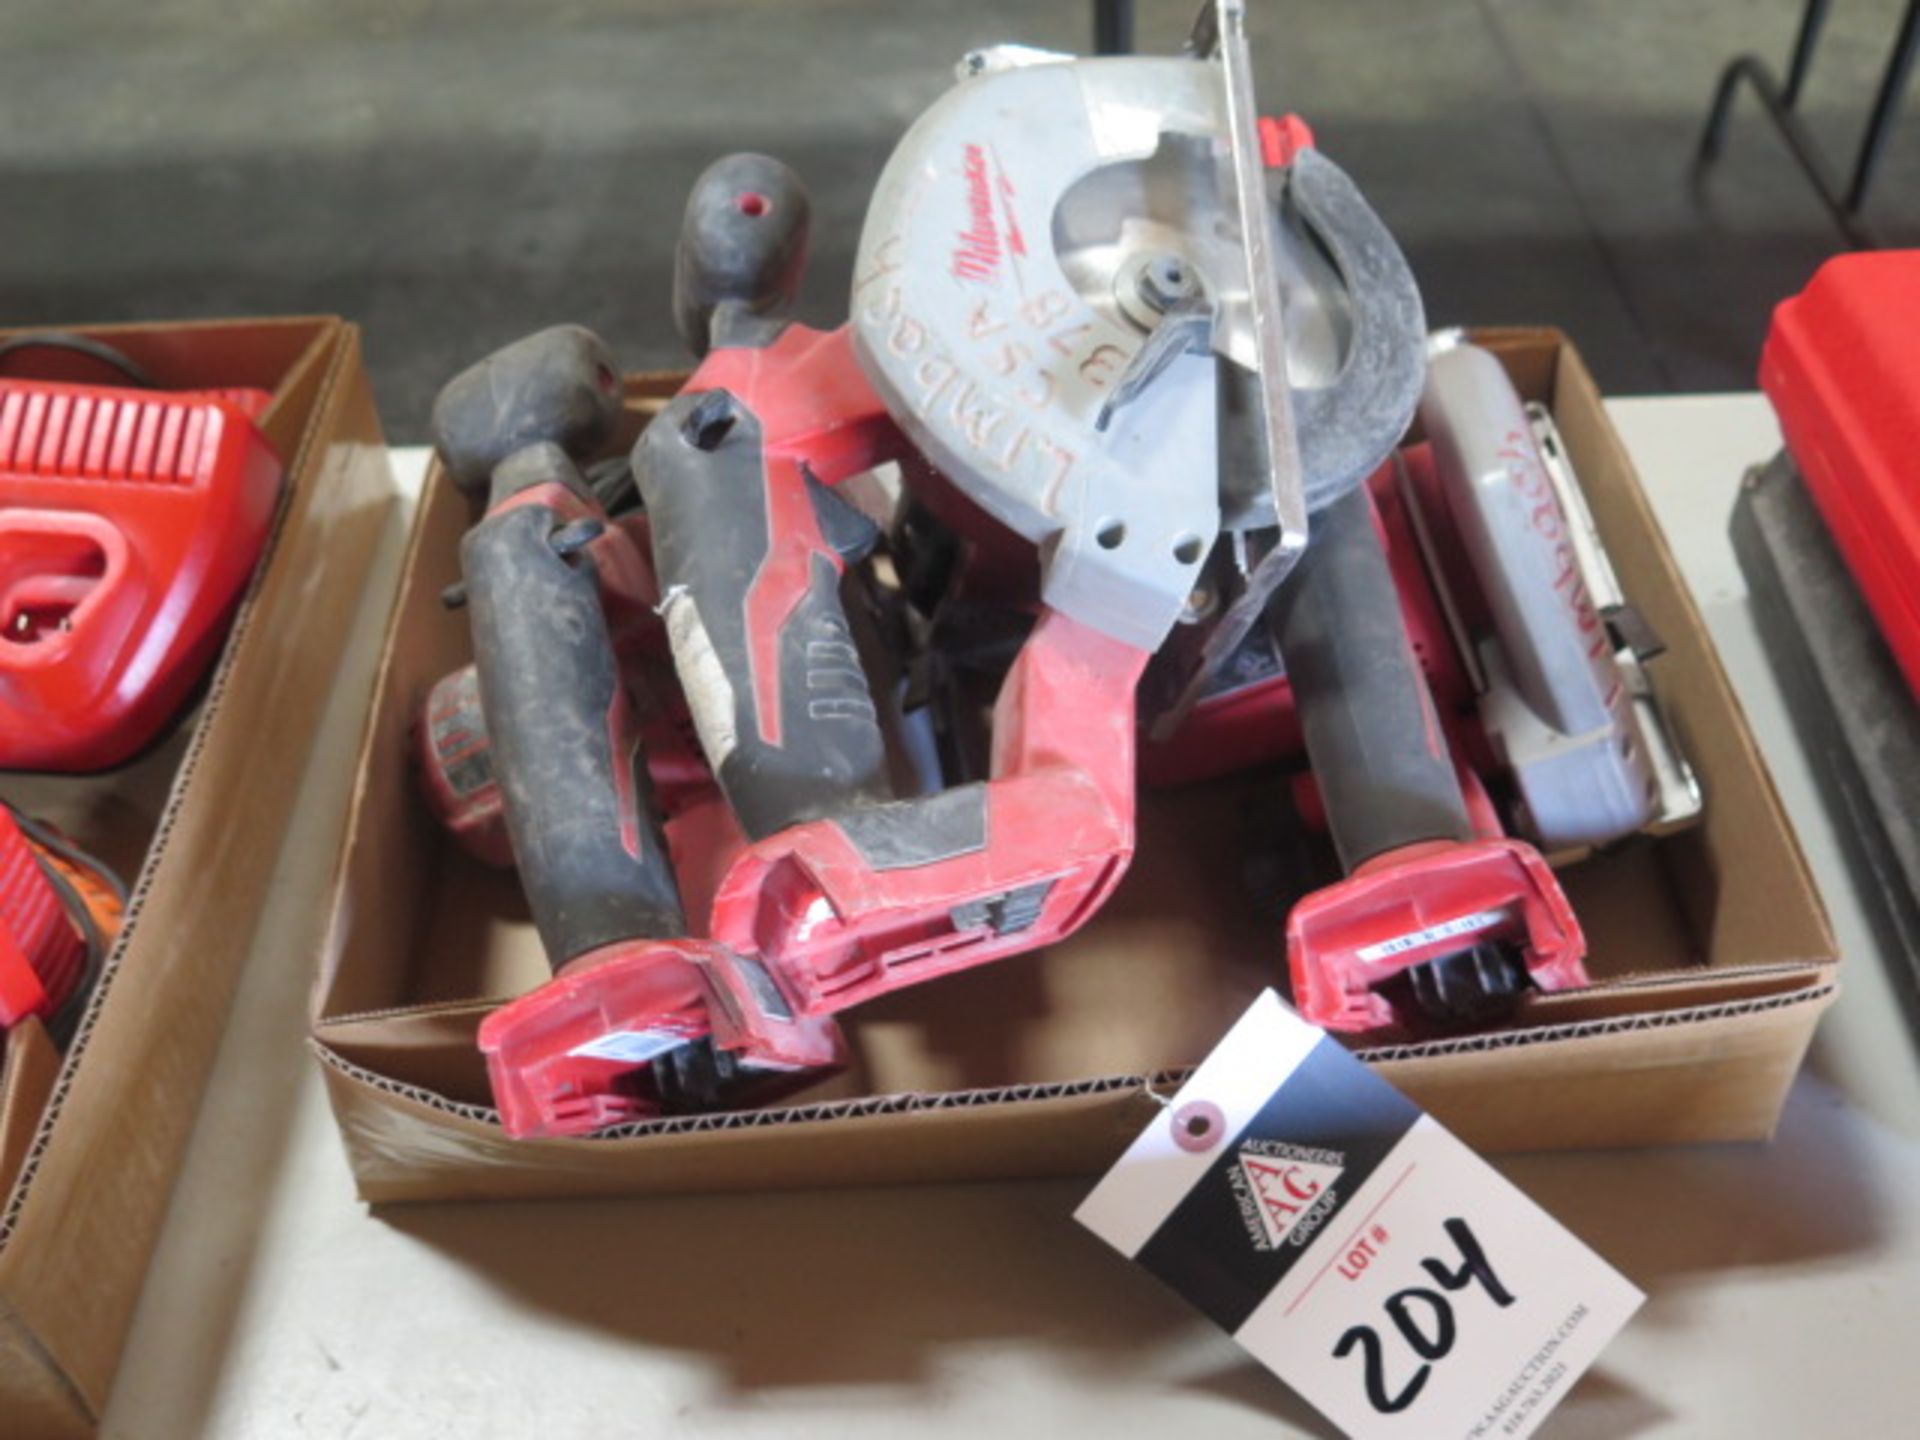 Milwaukee 18 Volt Circular Saws (3) (SOLD AS-IS - NO WARRANTY)